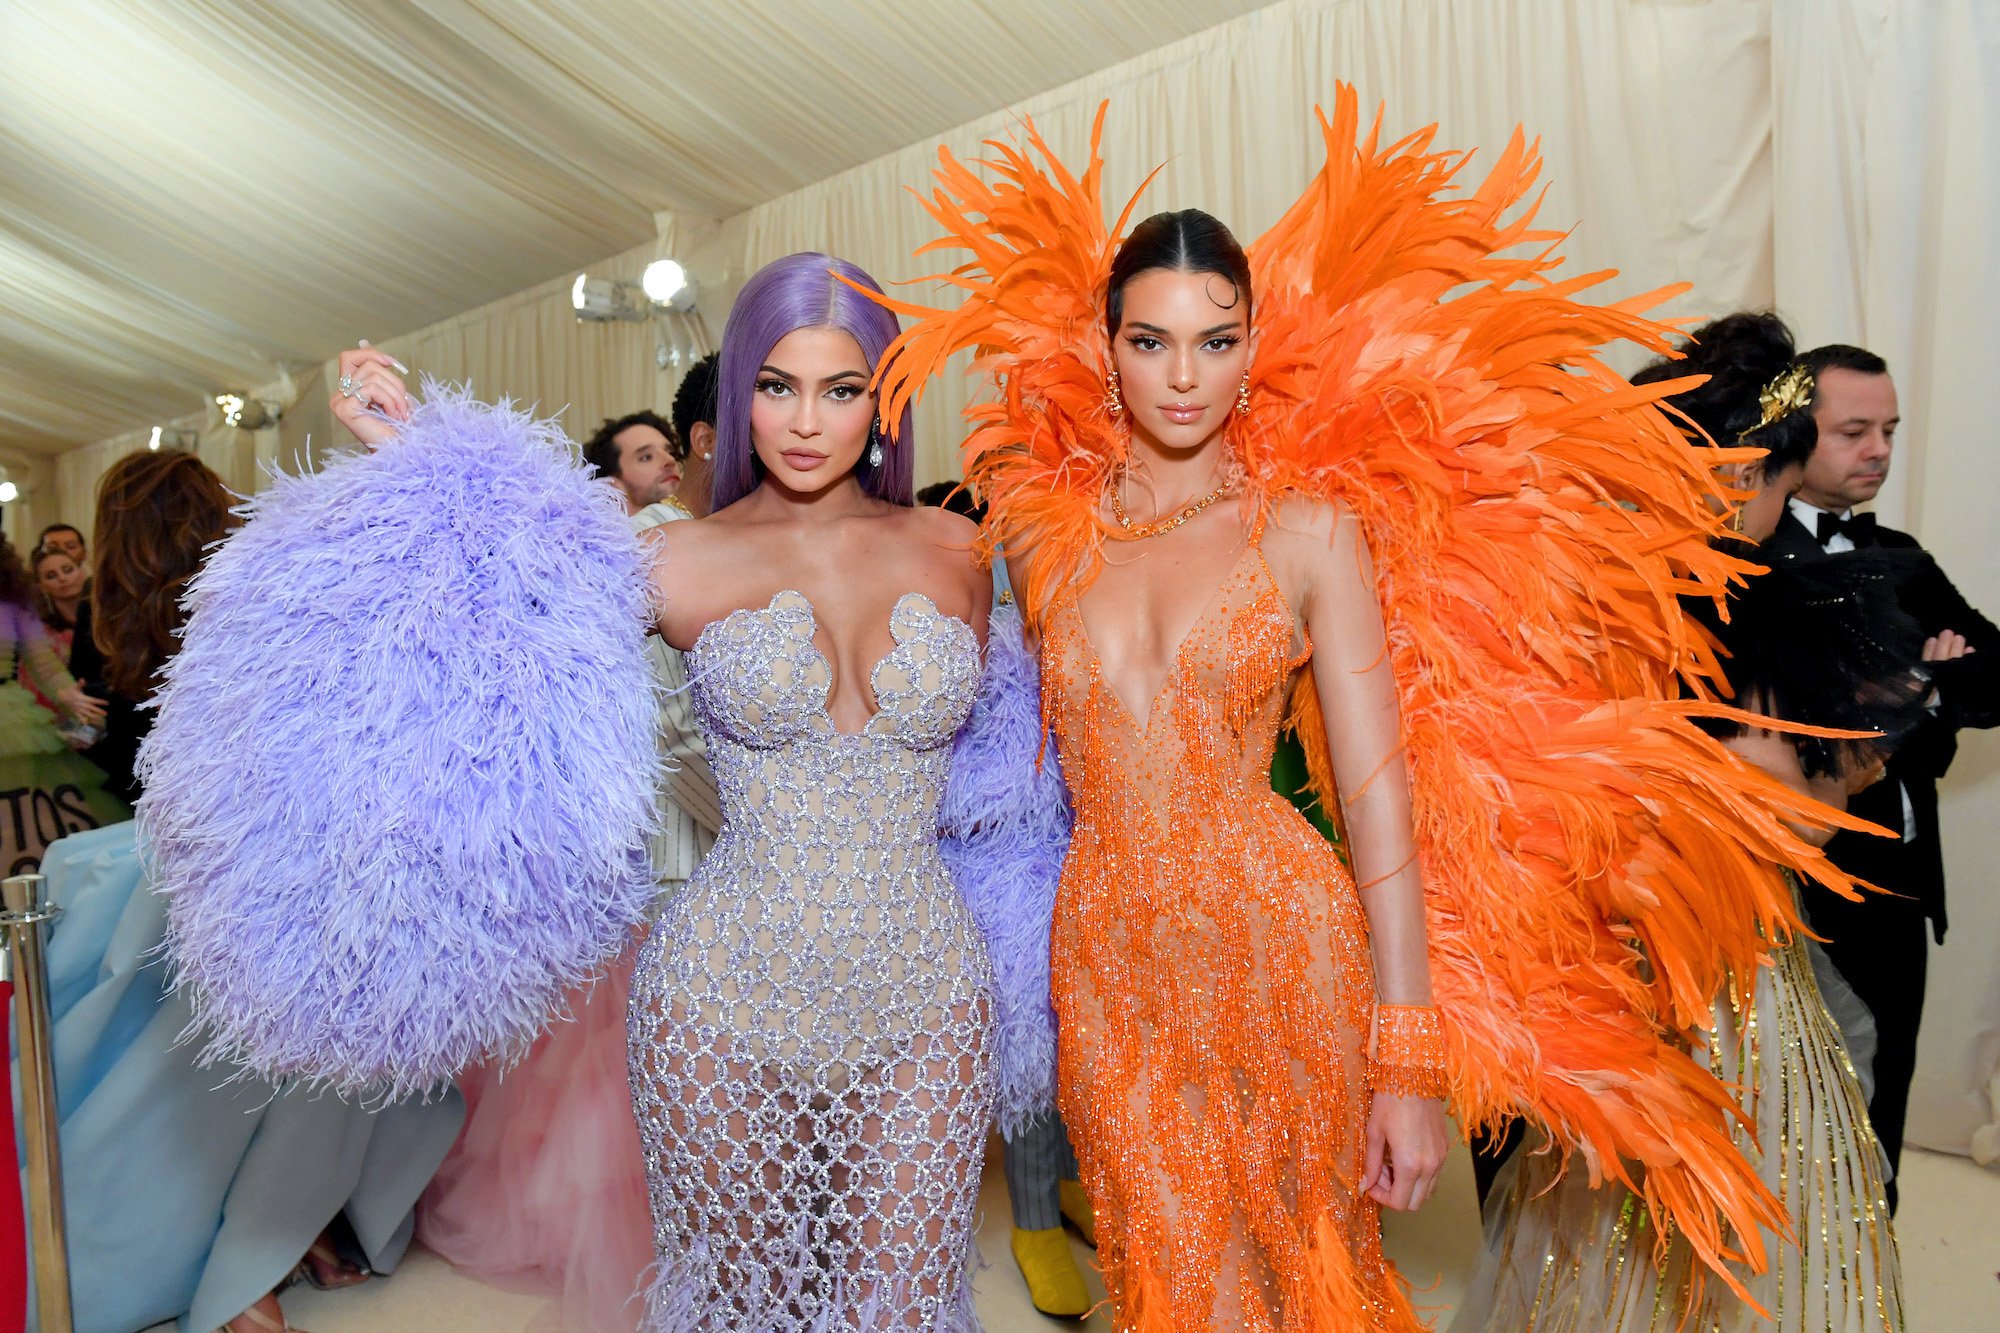 Kylie and Kendall Jenner posing together at the 2019 Met Gala